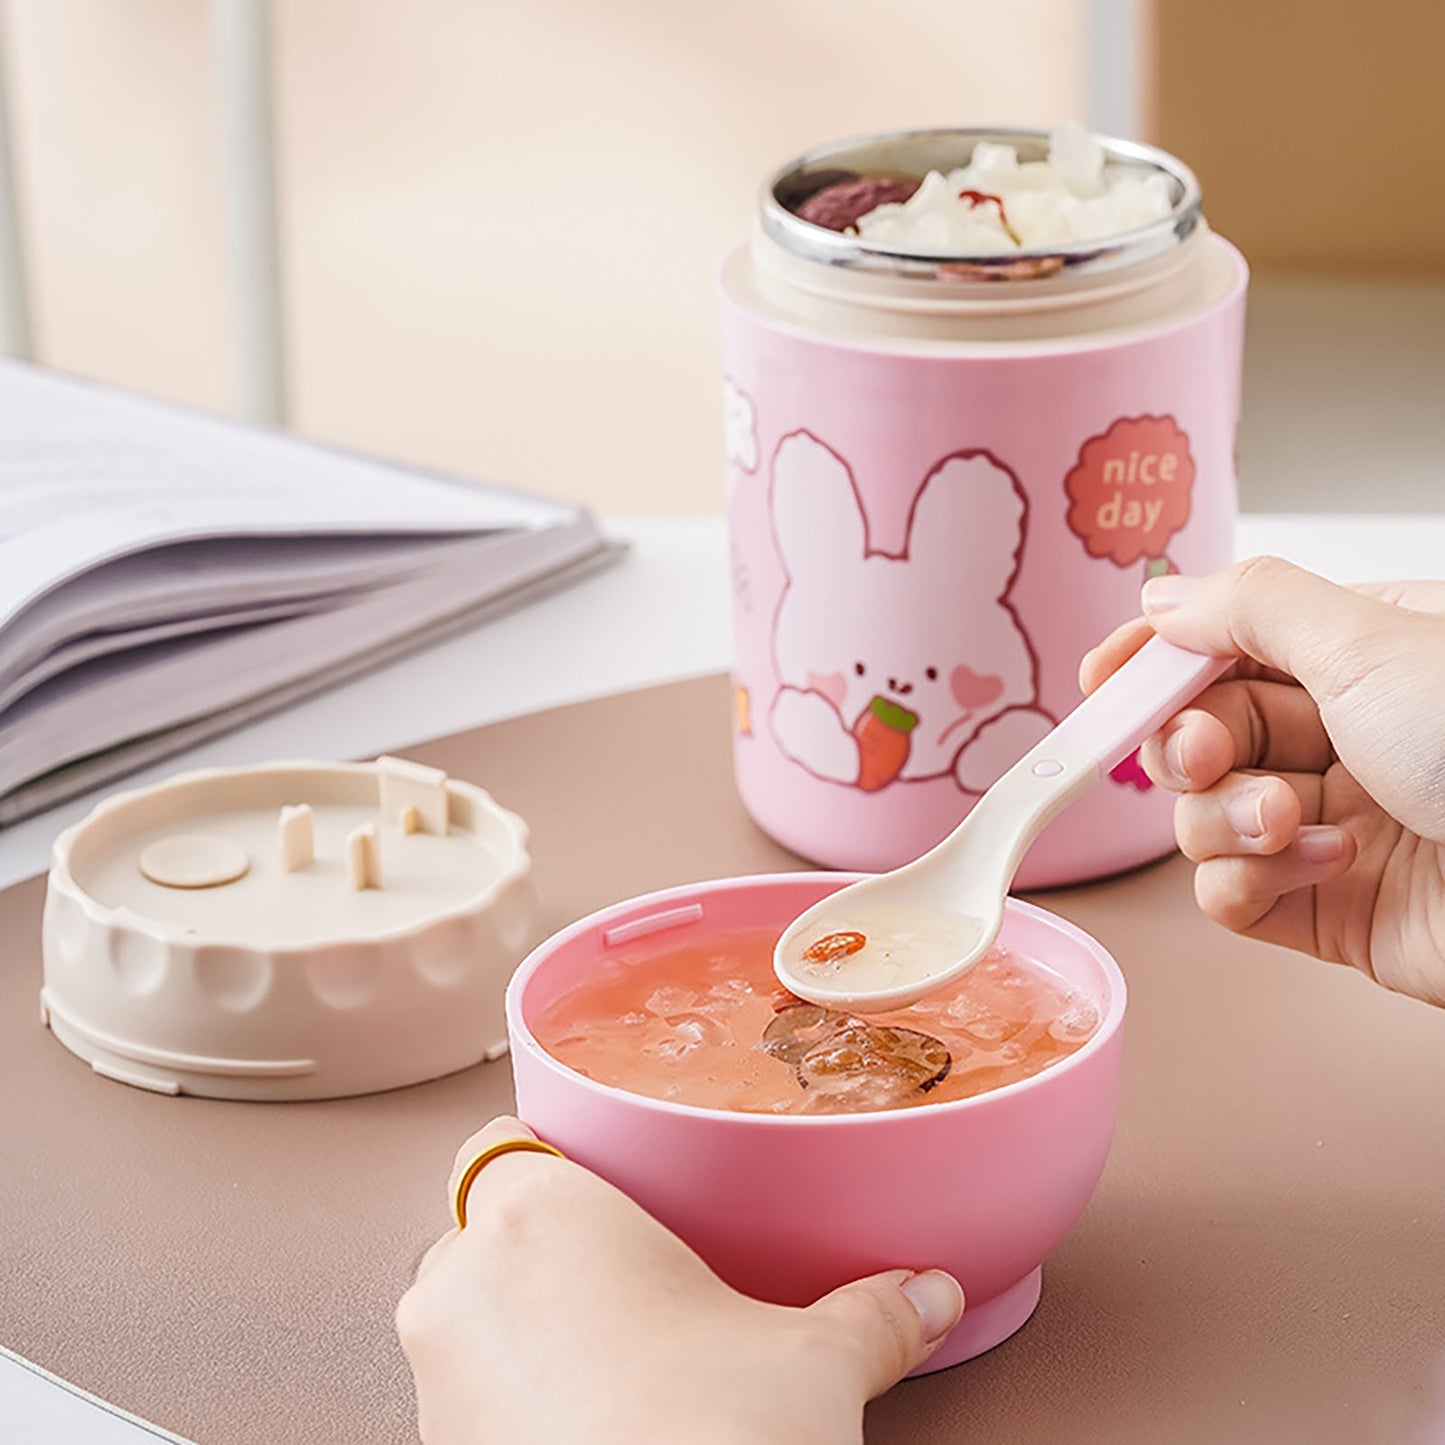 Kawaii 3 Layer Thermos Being Used